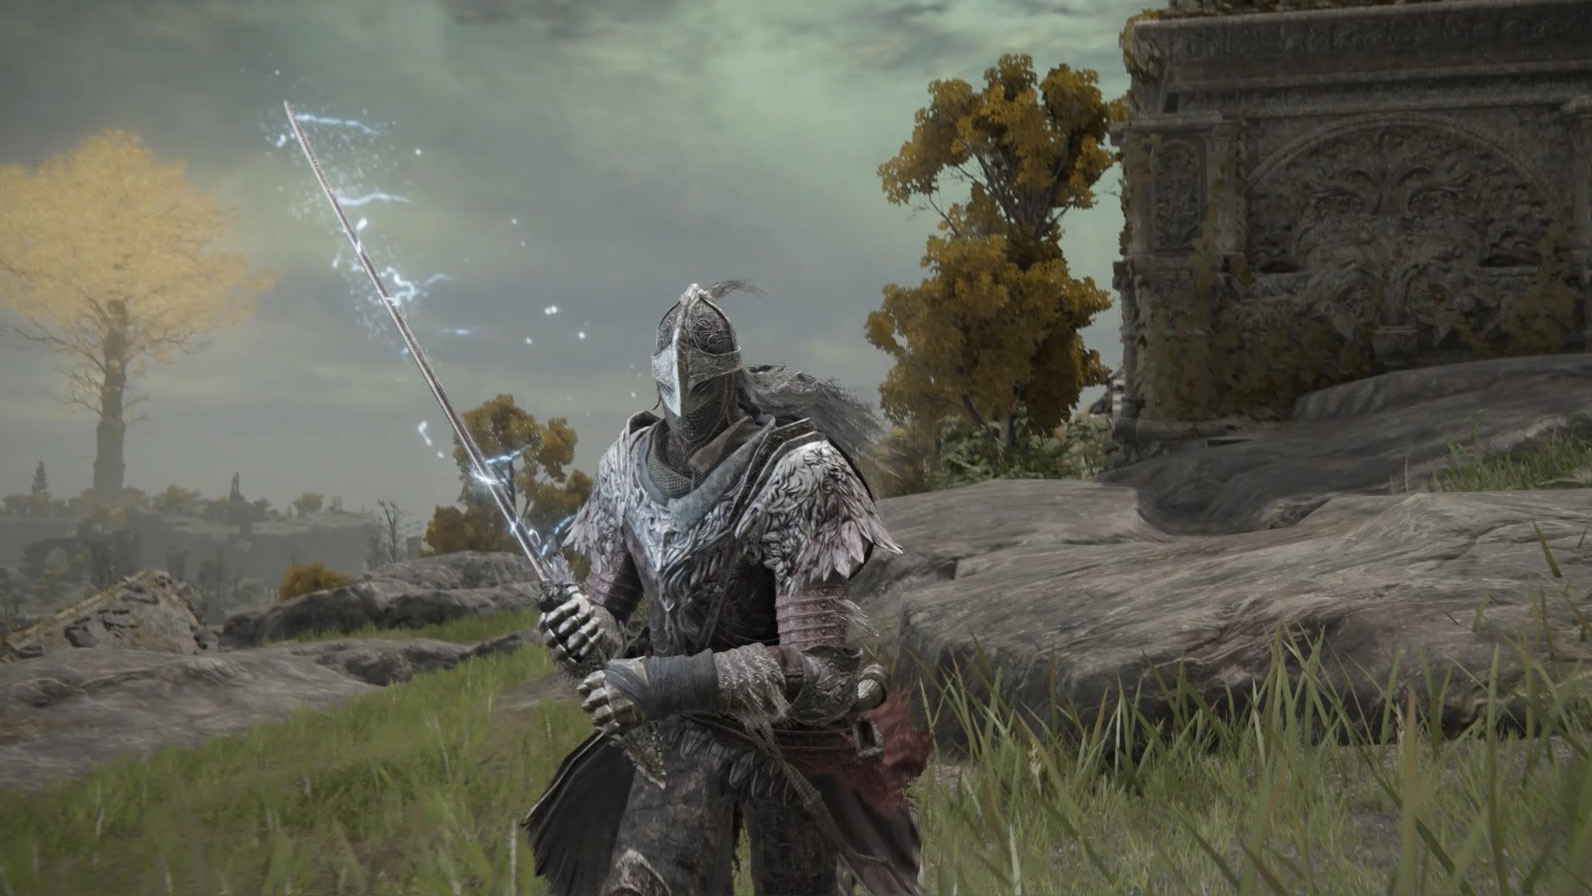 Elden Ring Network Test - A knight holds a lightning sword in a grassy area.